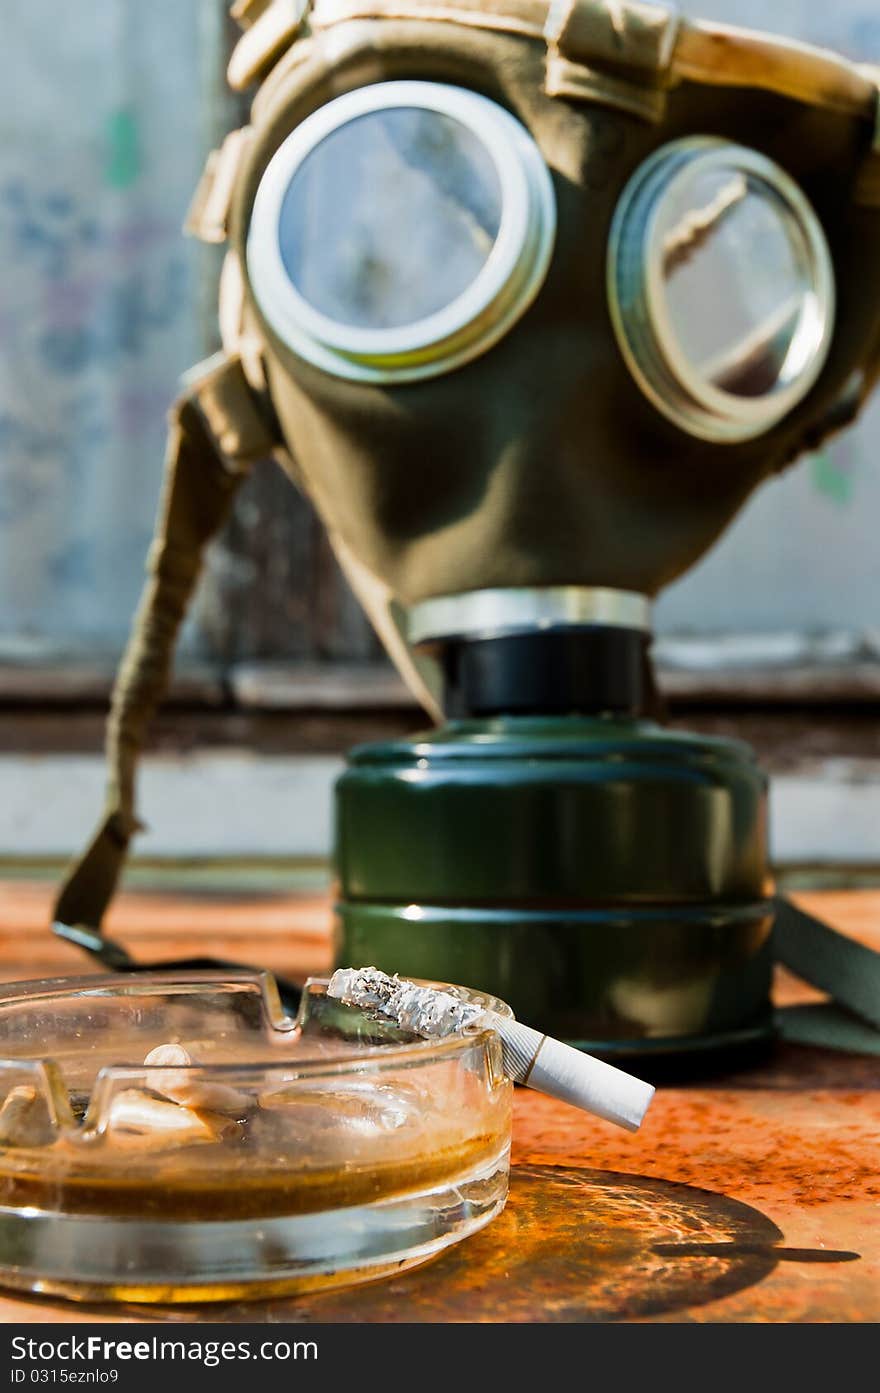 Cigarette with pot and gasmask in background on rusty table